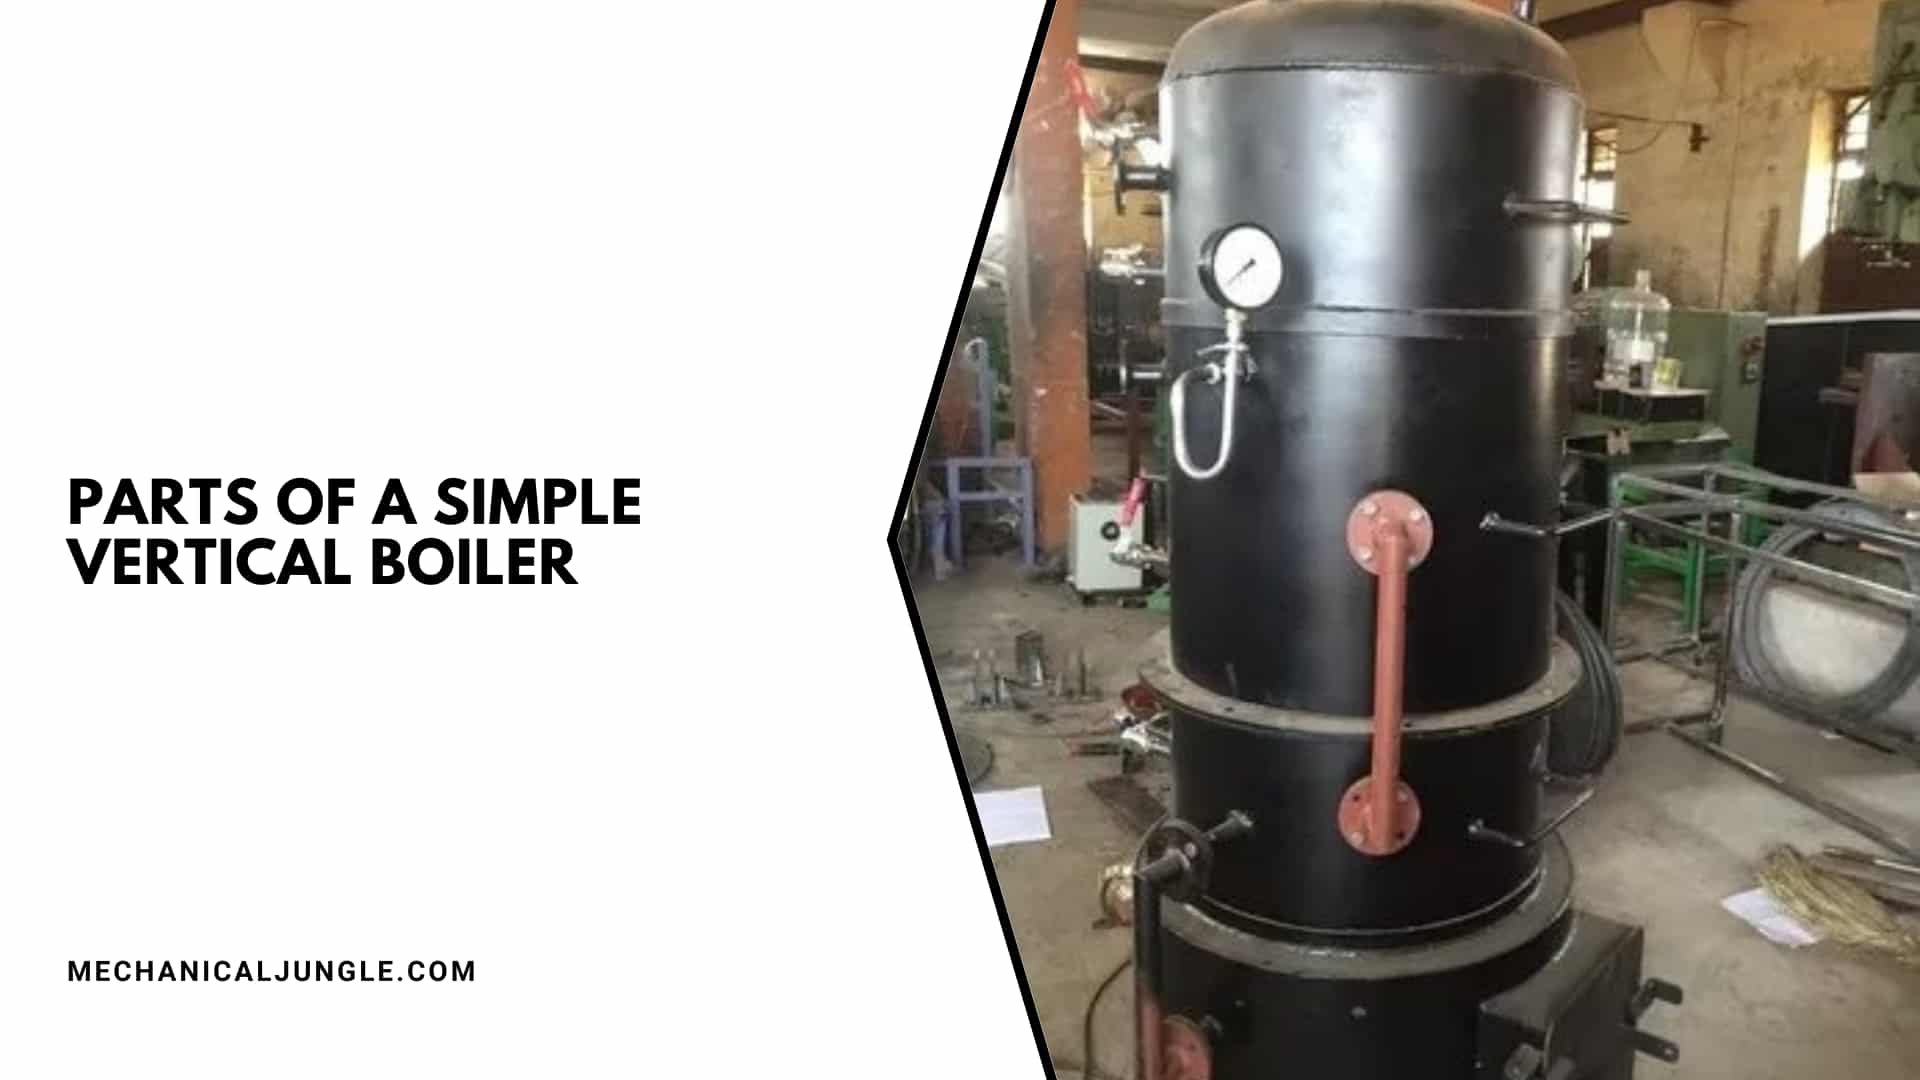 Parts of a Simple Vertical Boiler